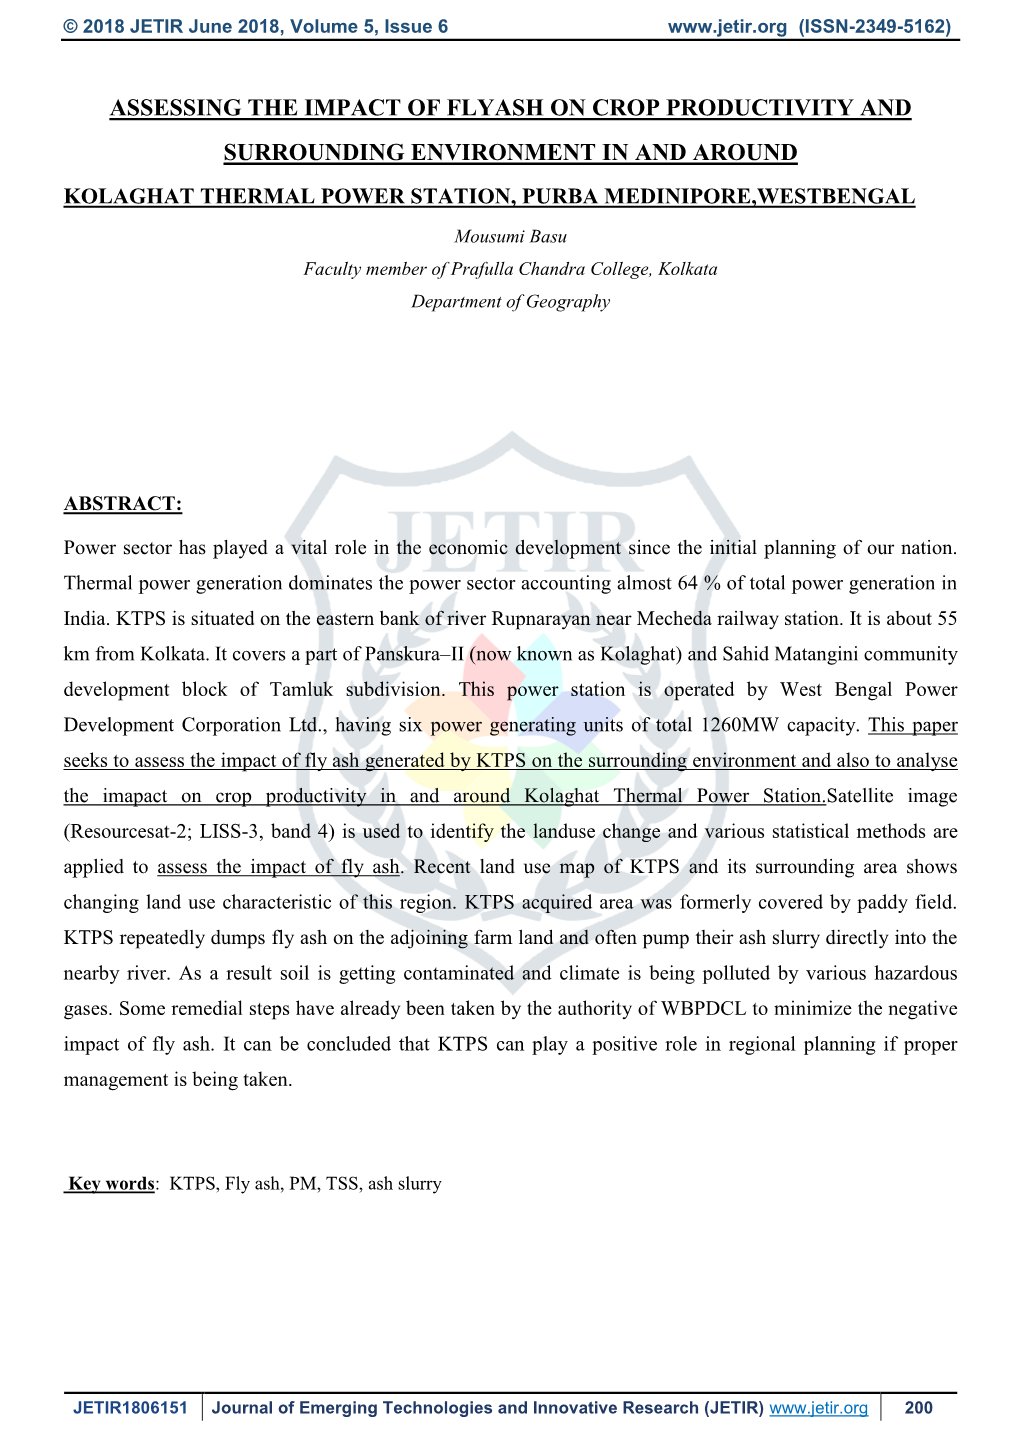 Assessing the Impact of Flyash on Crop Productivity and Surrounding Environment in and Around Kolaghat Thermal Power Station, Purba Medinipore,Westbengal